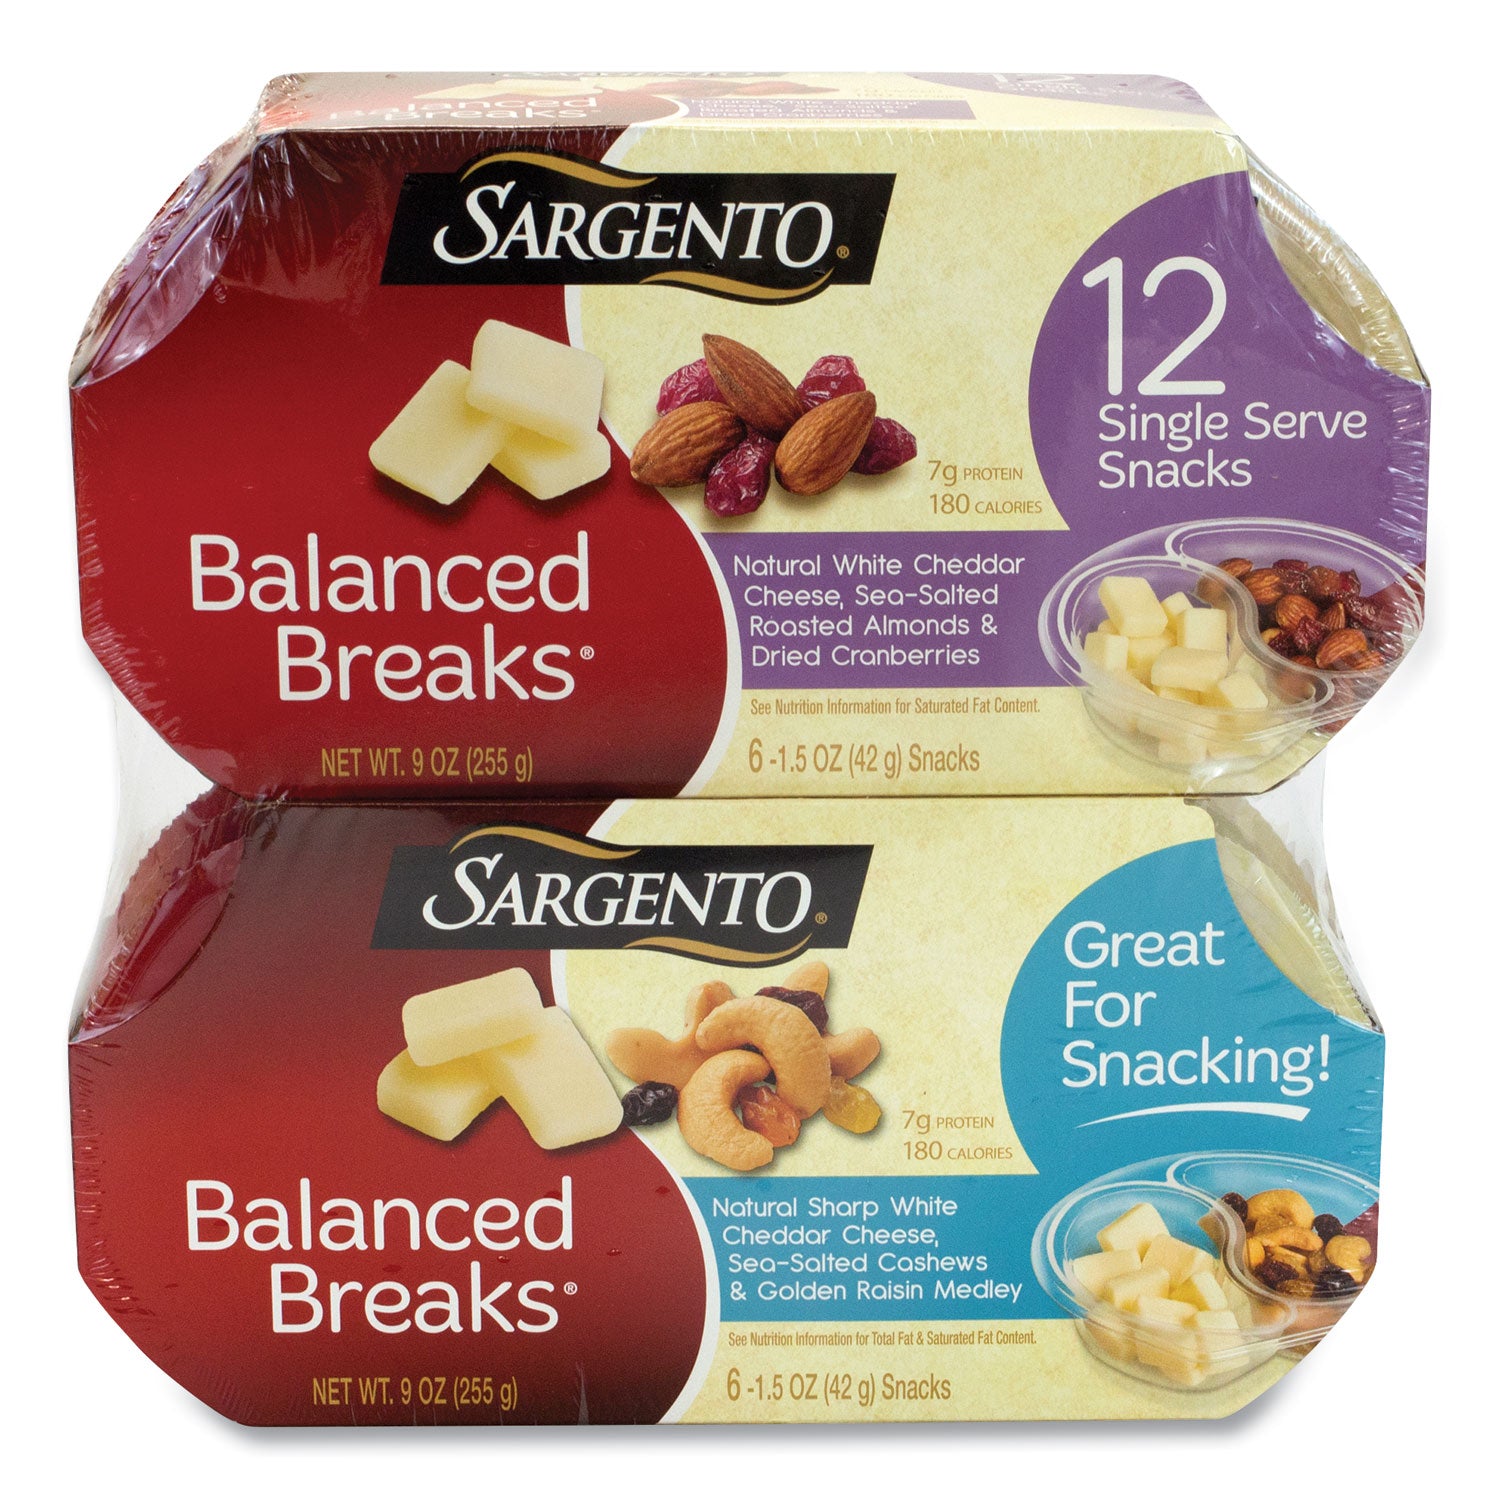 balanced-breaks-two-assorted-flavor-packs-15-oz-pack-12-packs-carton-ships-in-1-3-business-days_grr90200006 - 1